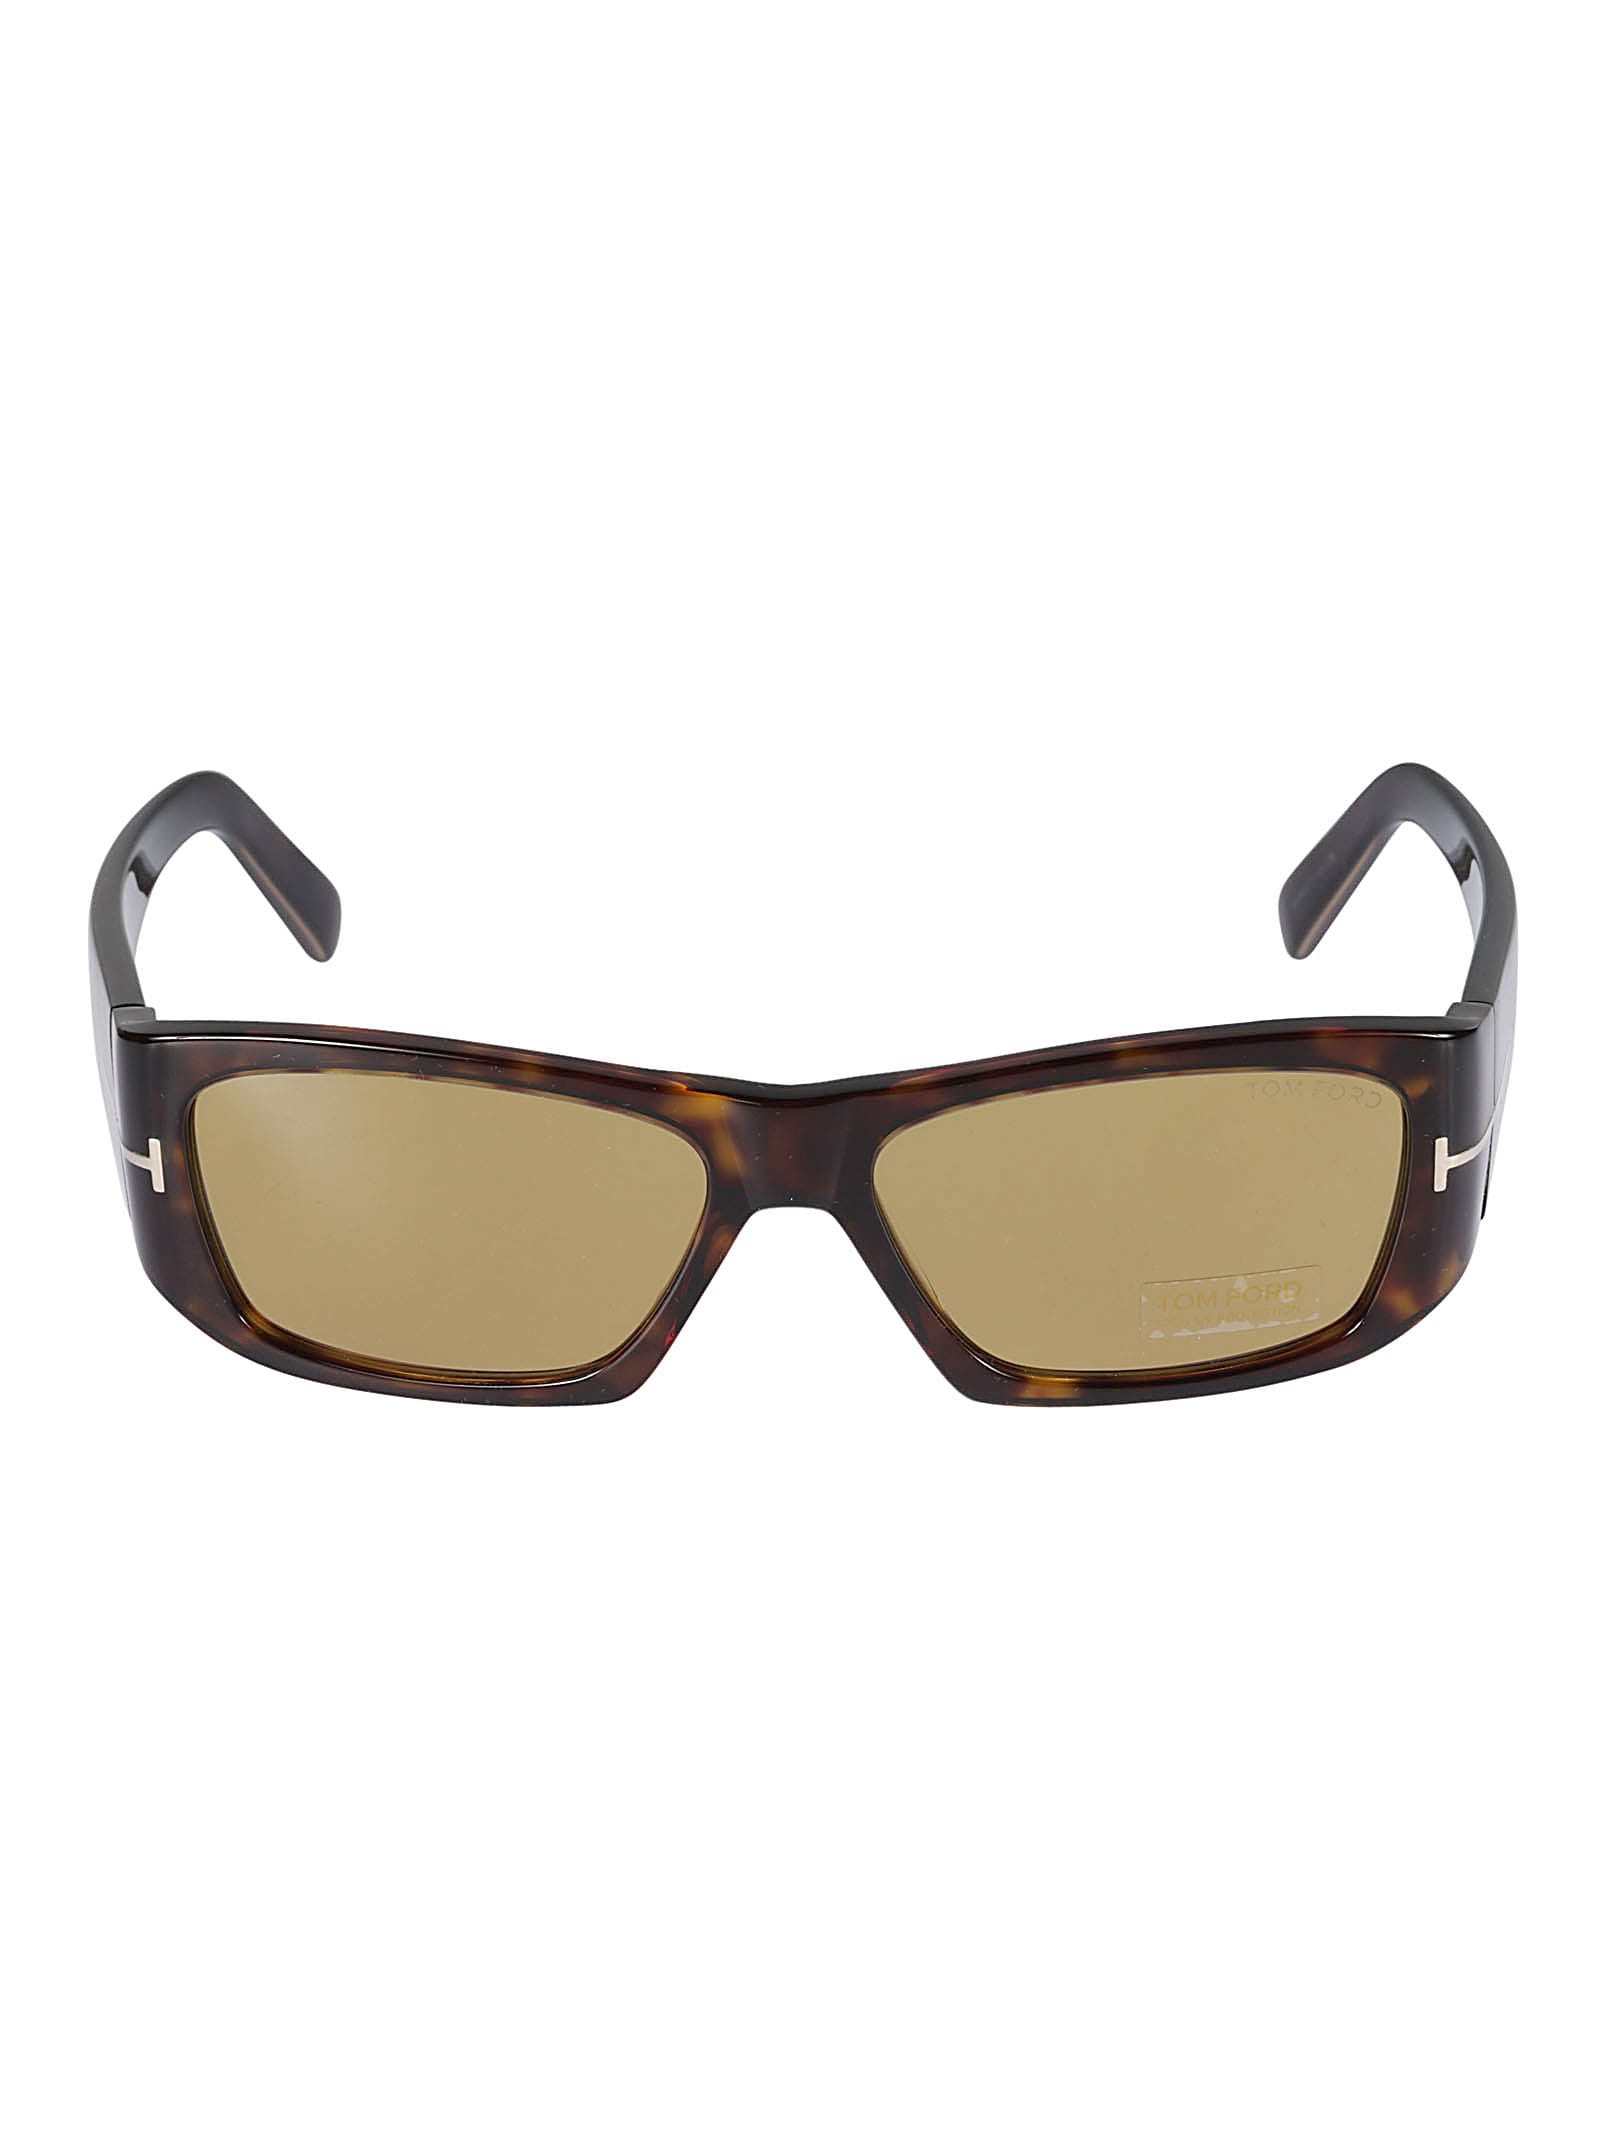 TOM FORD ANDRES-02 SUNGLASSES